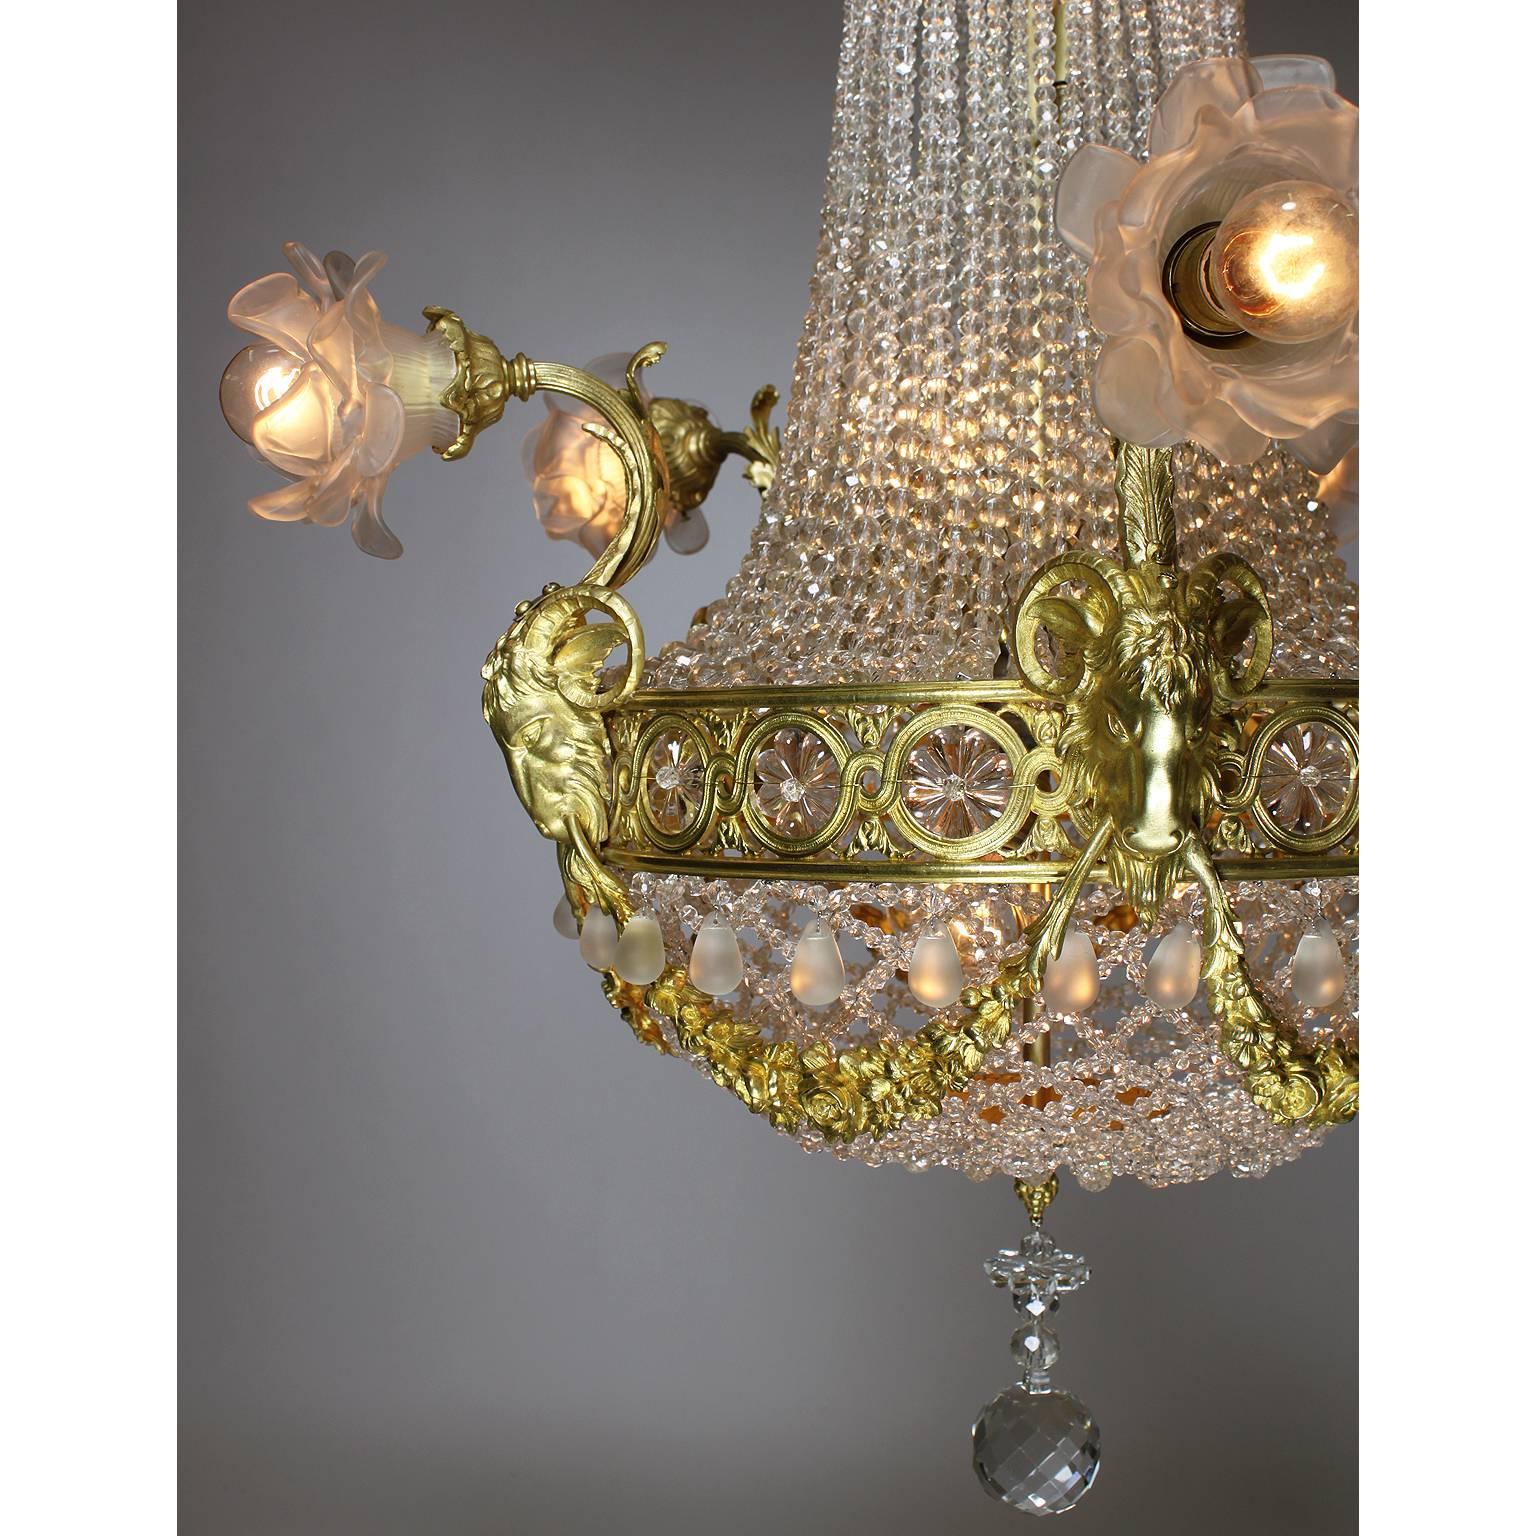 Early 20th Century French 19th-20th Century Louis XVI Style Gilt-Bronze and Beaded Glass Chandelier